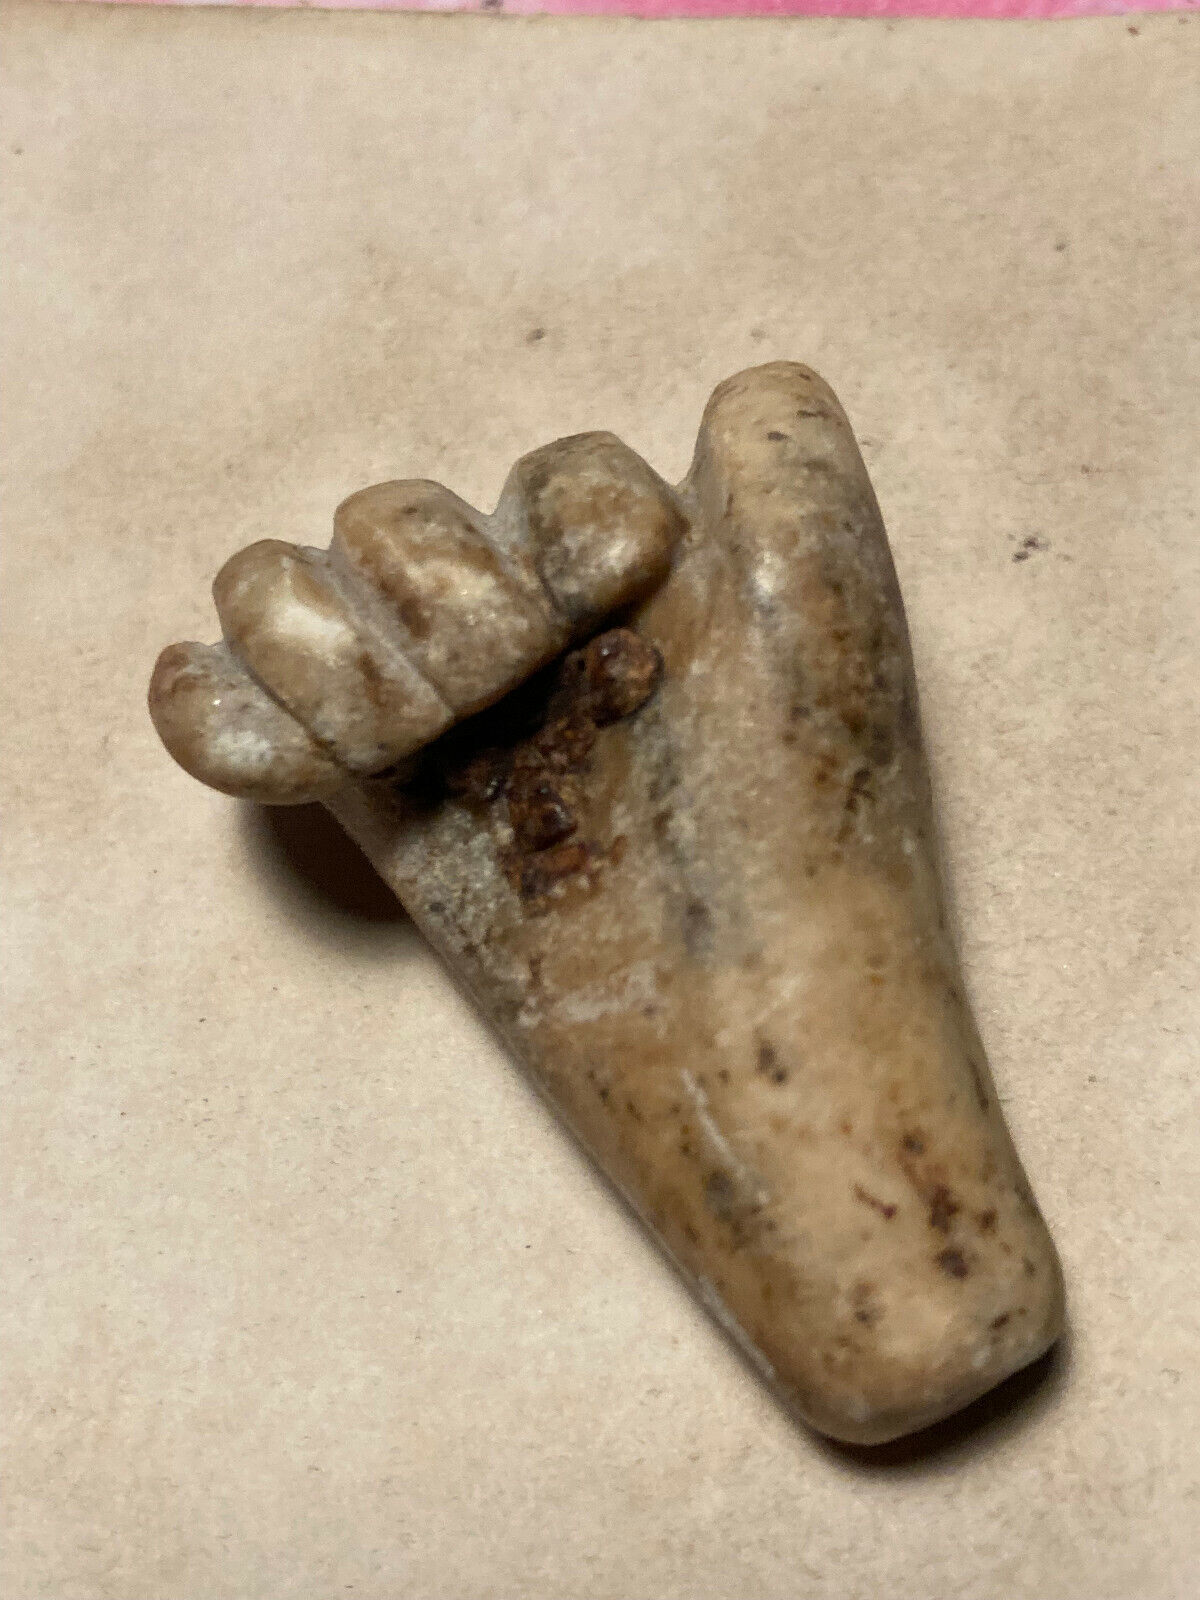 RARE ANCIENT Ex Voto : Hand Sculture - 1600's - South Italy - Special  